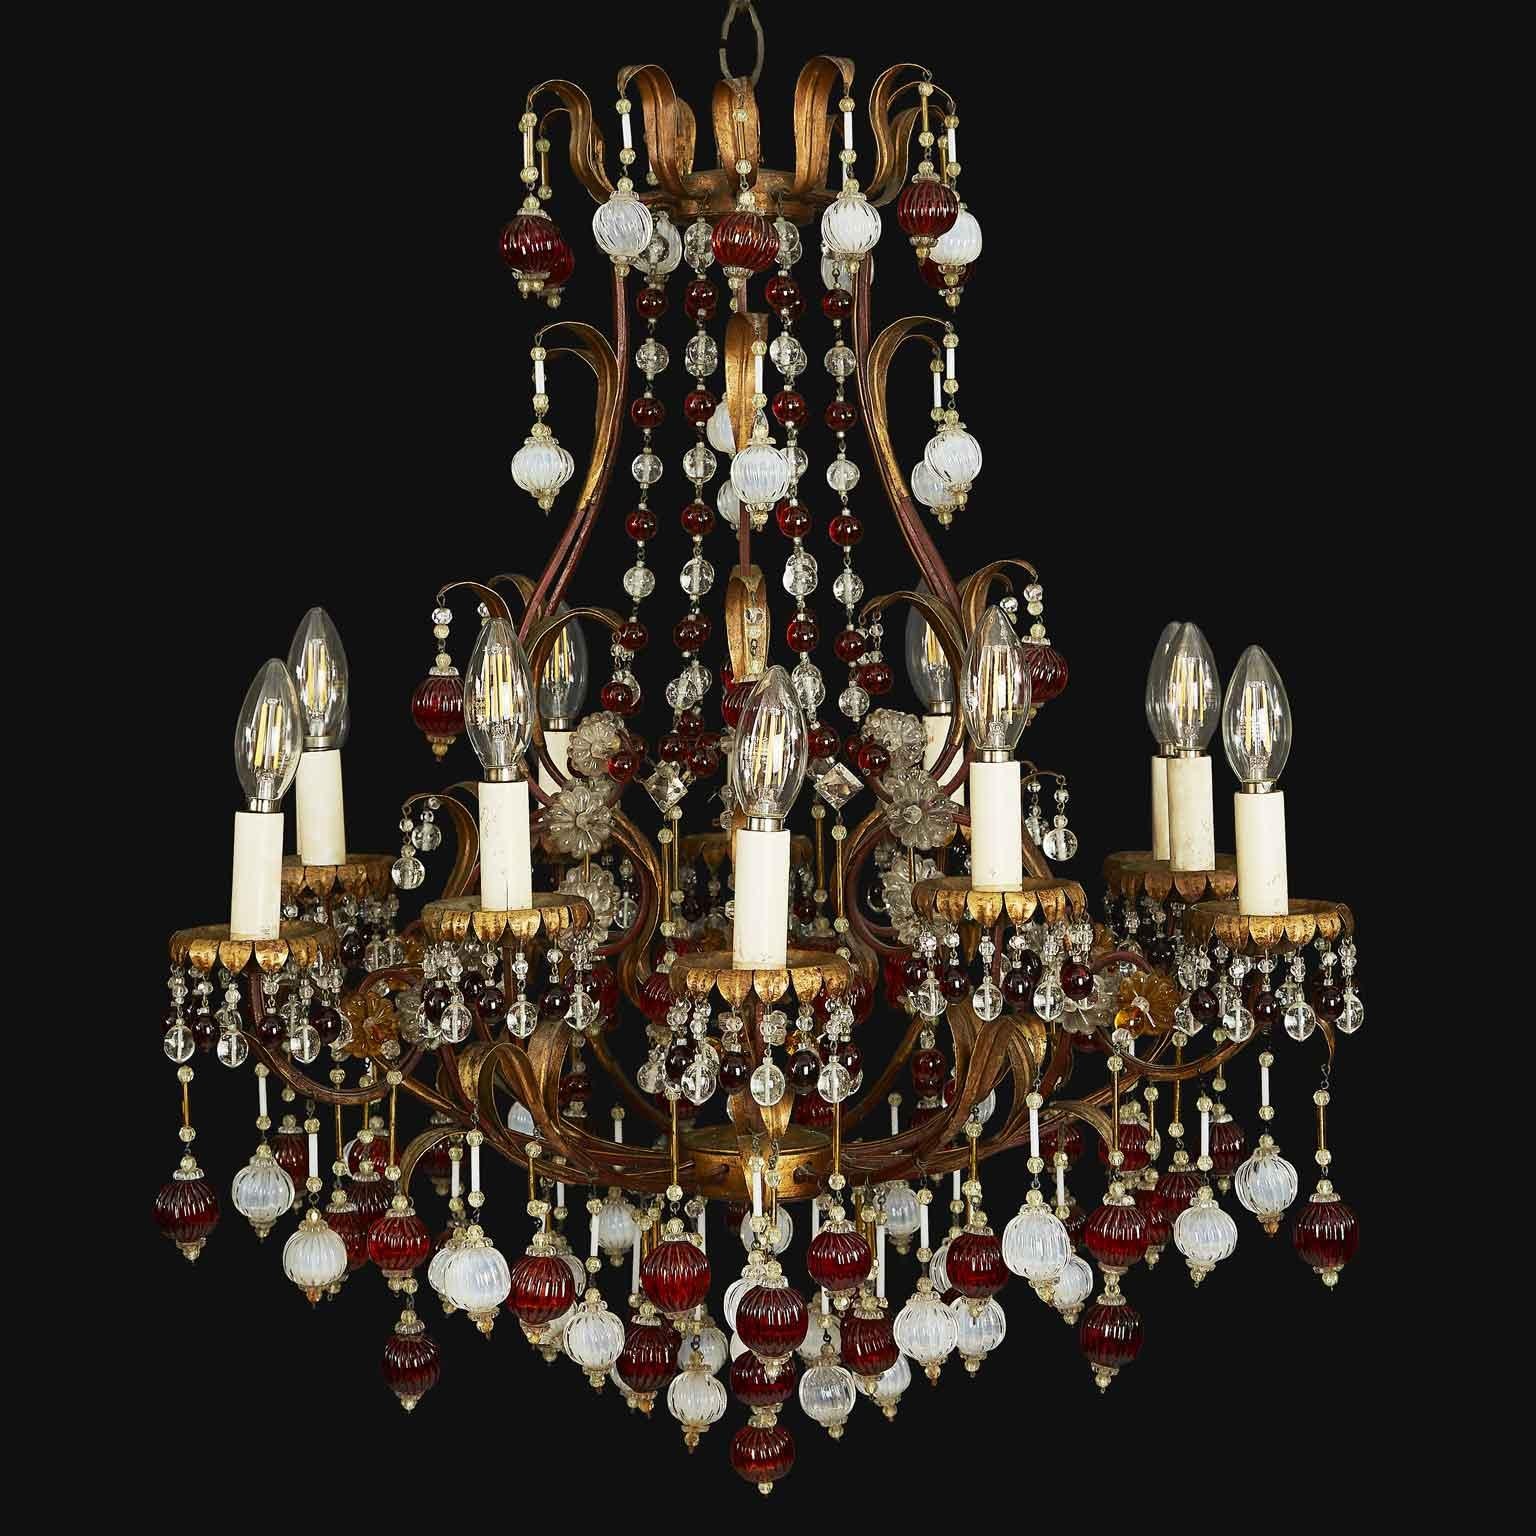 Twelve-light chandelier  on two tiers of height, made in Italy in about 1960. This chandelier has a gilded iron cage frame, circular in shape, twelve curved arms adorned with foliate elements and richly decorated with colored glass, chains of red